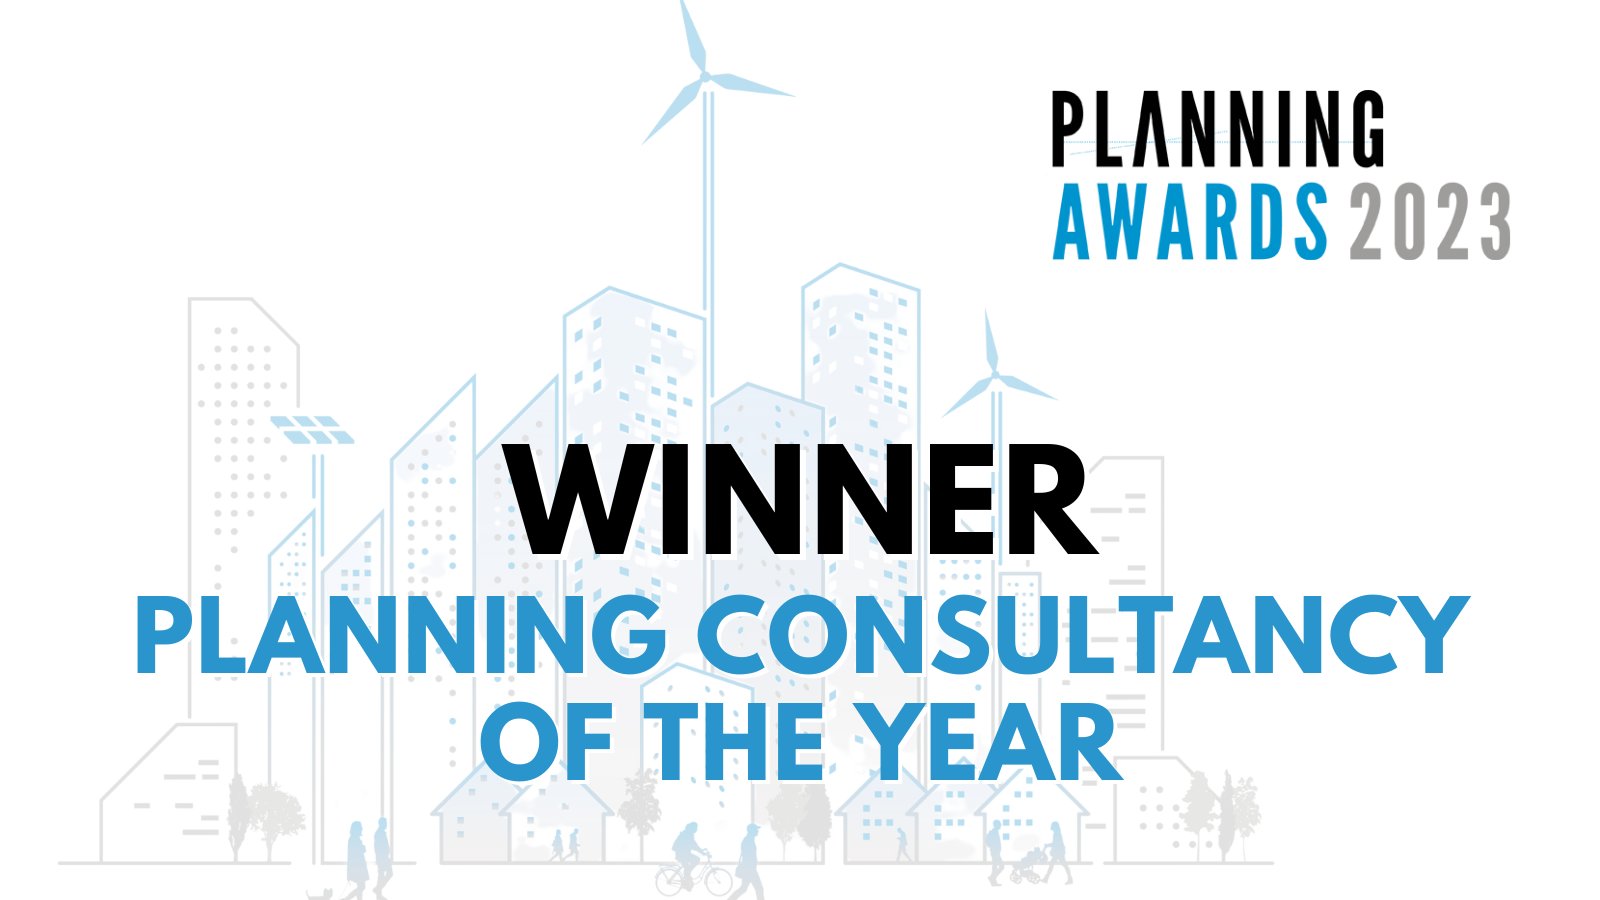 Planning Awards - Planning Consultancy of the Year 2024